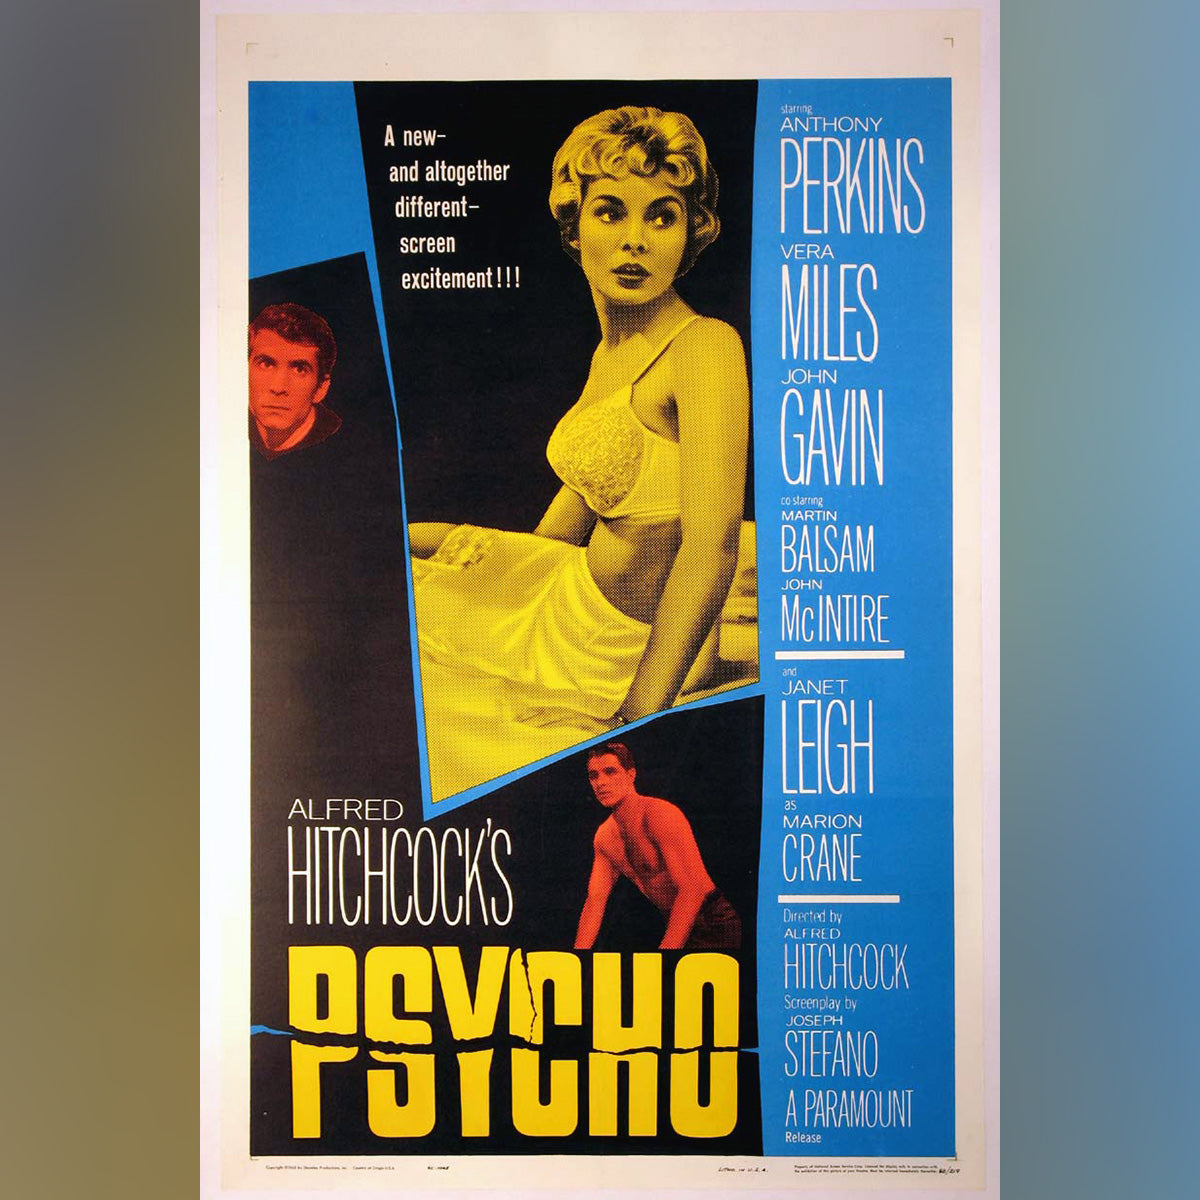 Sympathy for the Devil: Revisiting Psycho II - FEATURING TOM HOLLAND - FULL  DOCUMENTARY - YouTube